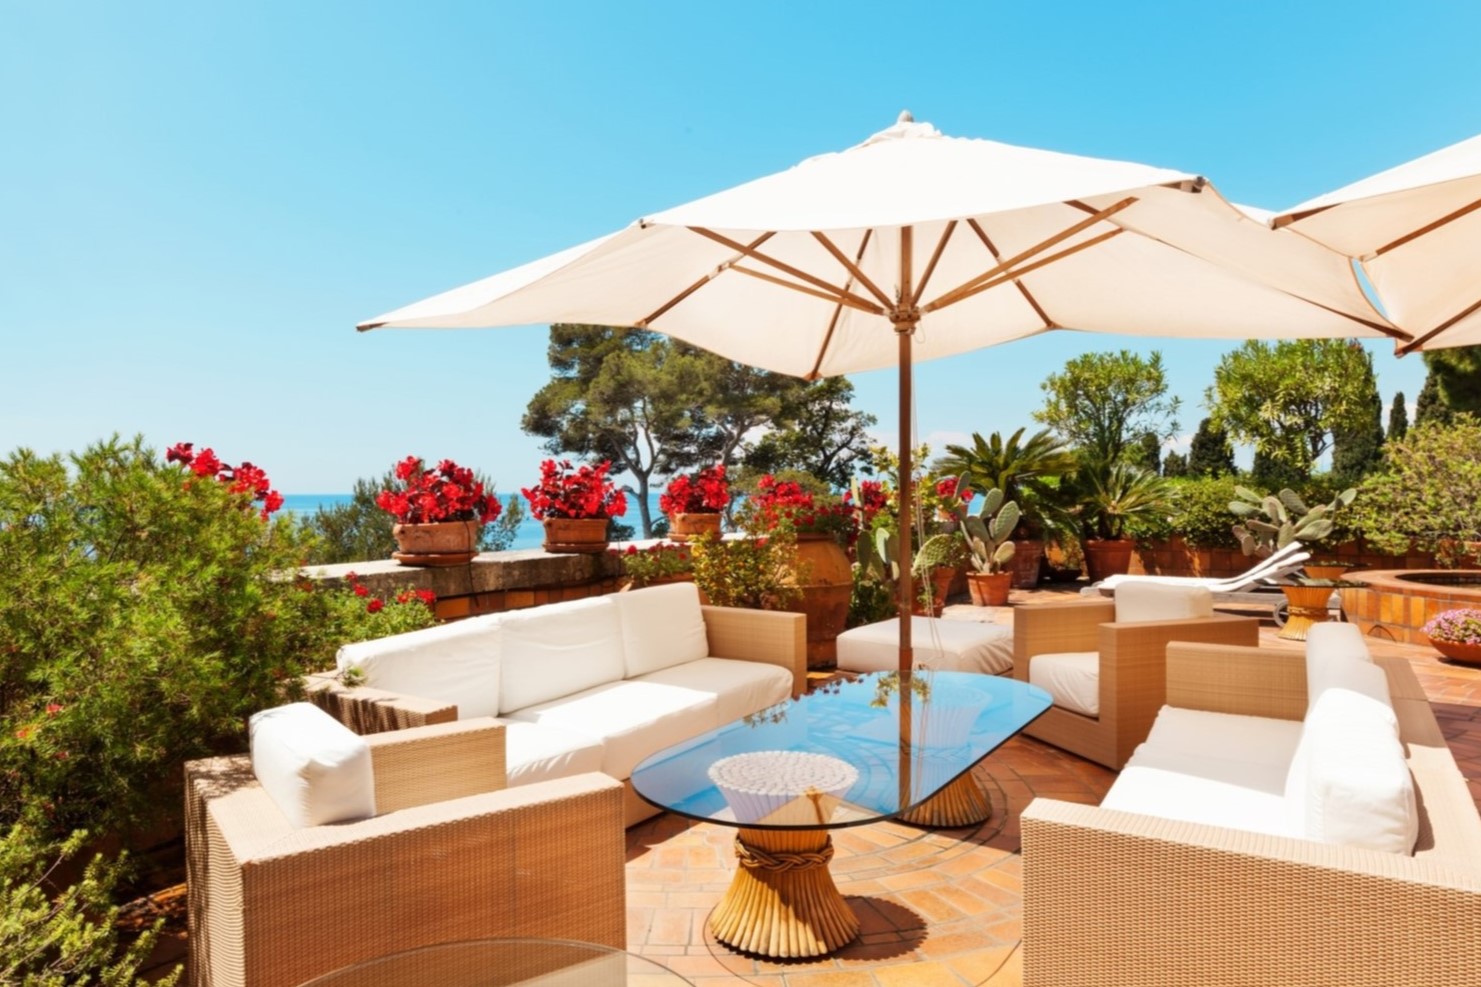 How To Protect Outdoor Furniture From The Sun